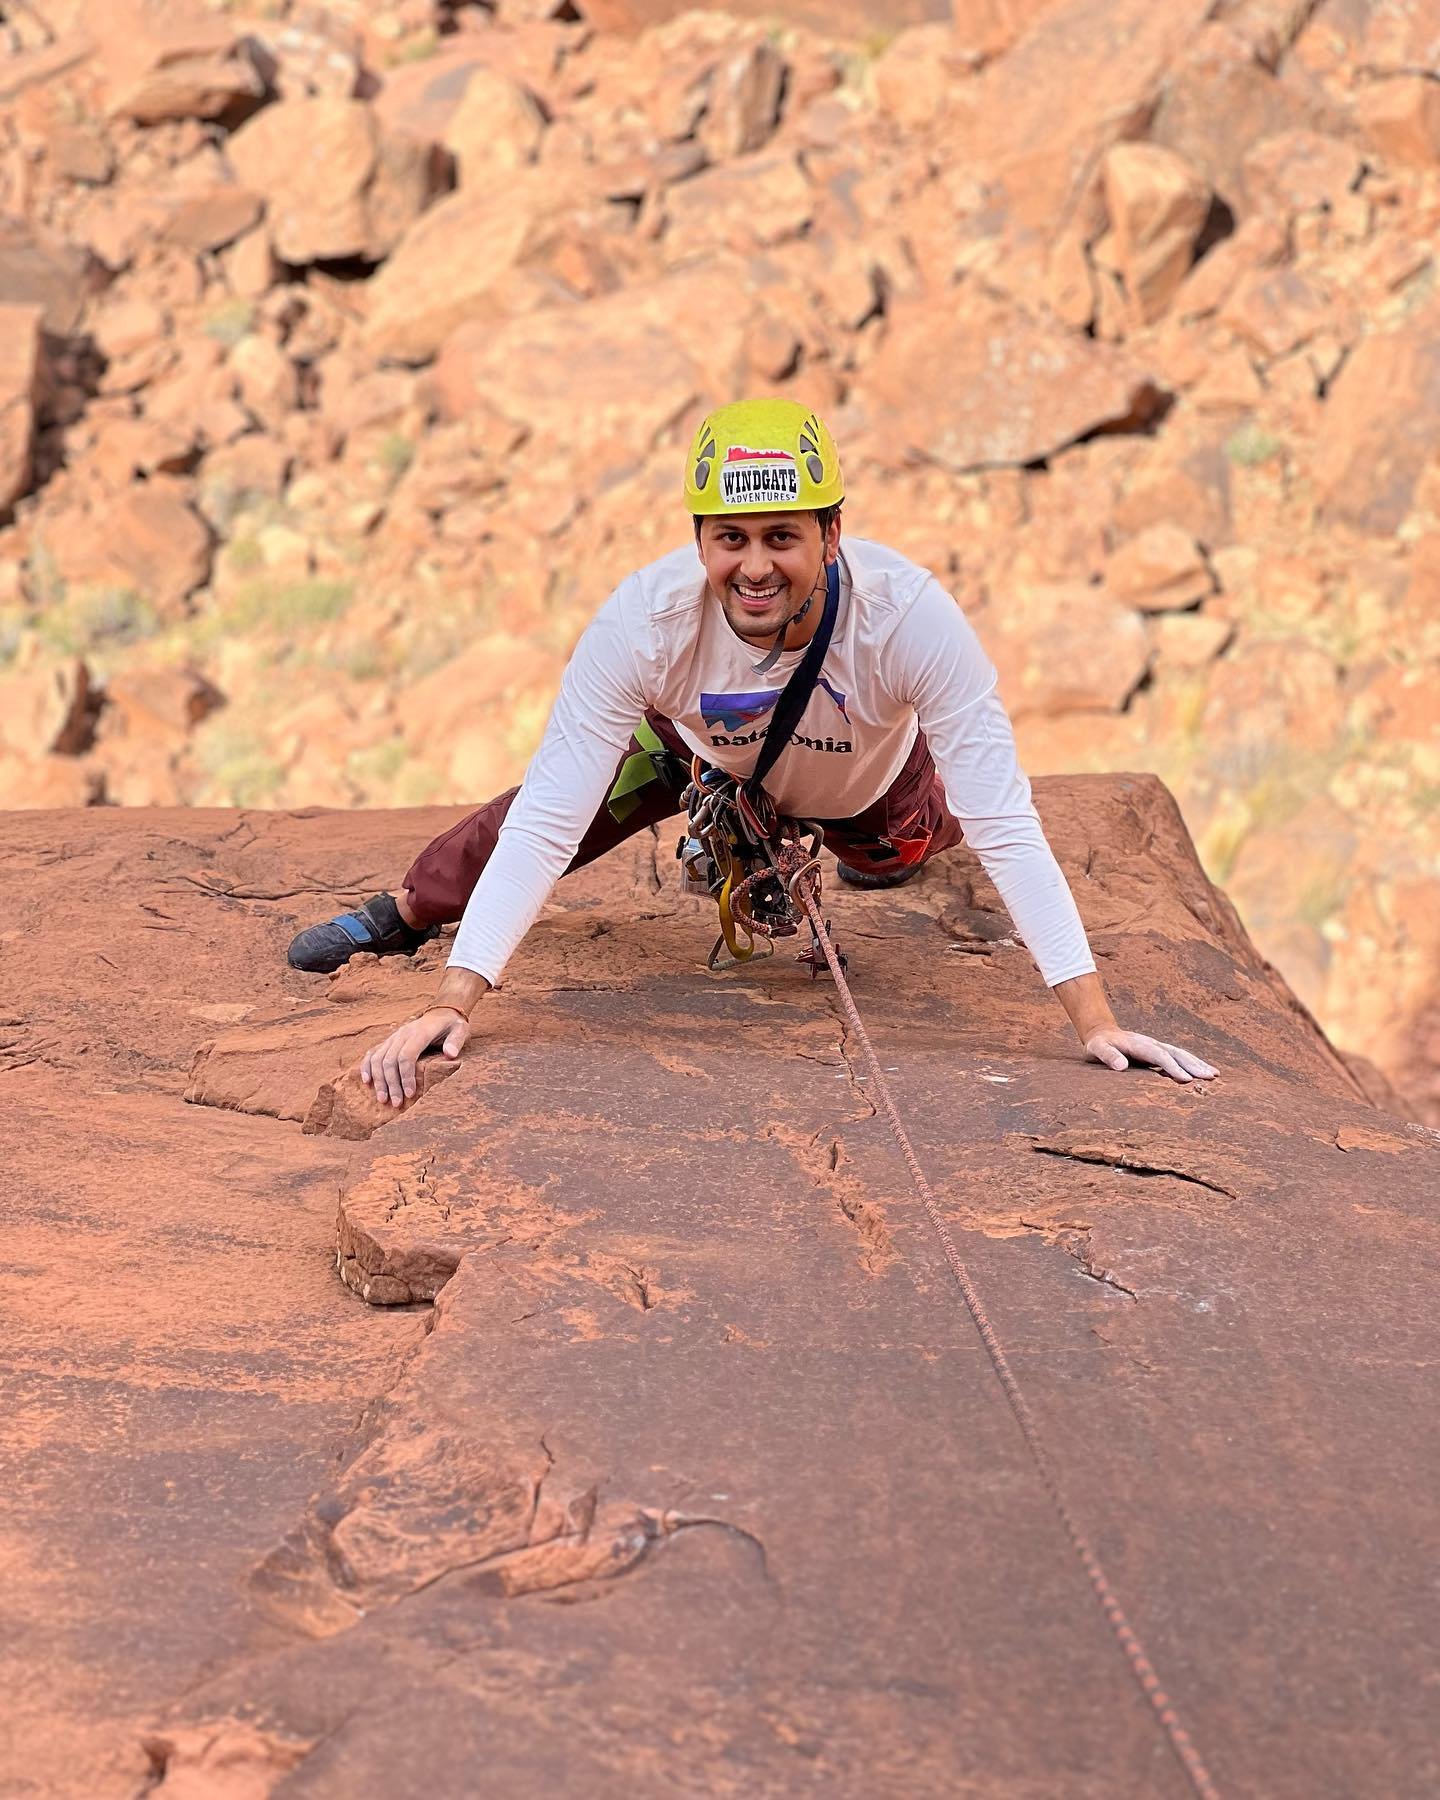 You were born to rock climb. Visit Moab and learn on some of the desert sandstone in the area. #supportlocal #supportsmallbusiness #moabguideservice #sandstone #bestofmoab #moab #windgateadventures #moabrockclimbingguideservice